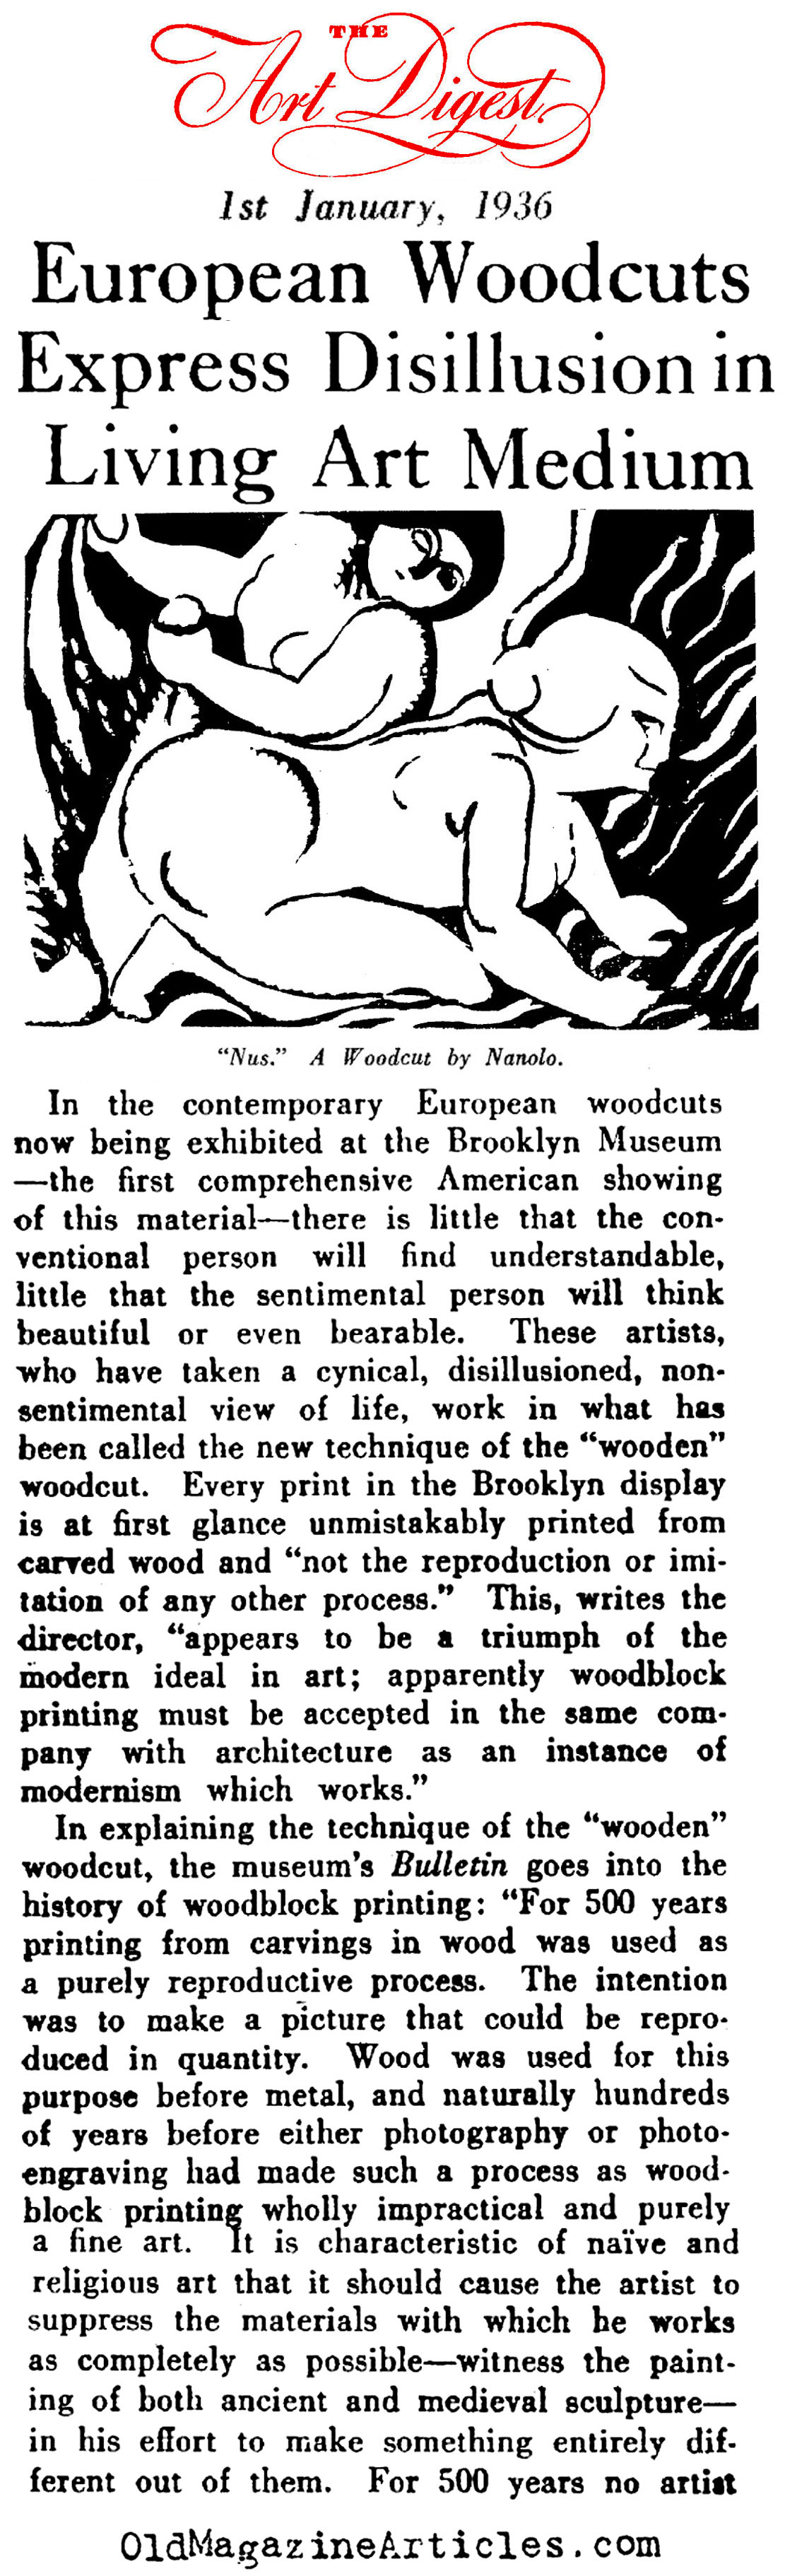 20th Century Artists Rediscover  Woodcut Printing  (Art Digest, 1936)